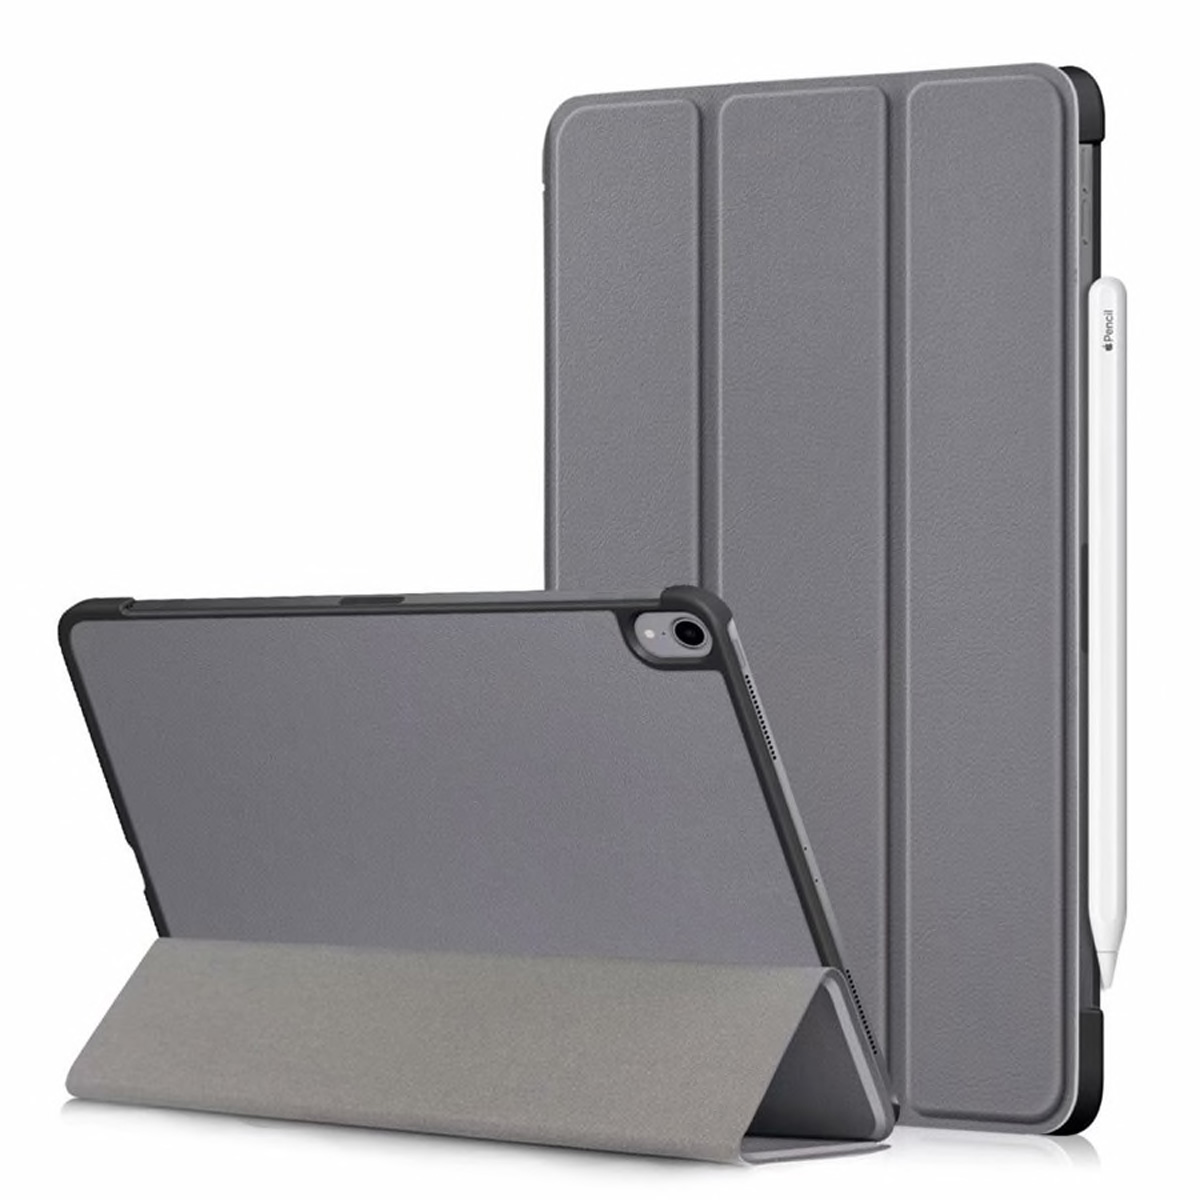 Case Smart Cover for Tablets Sleeve Case Bag Protective Pouch ...